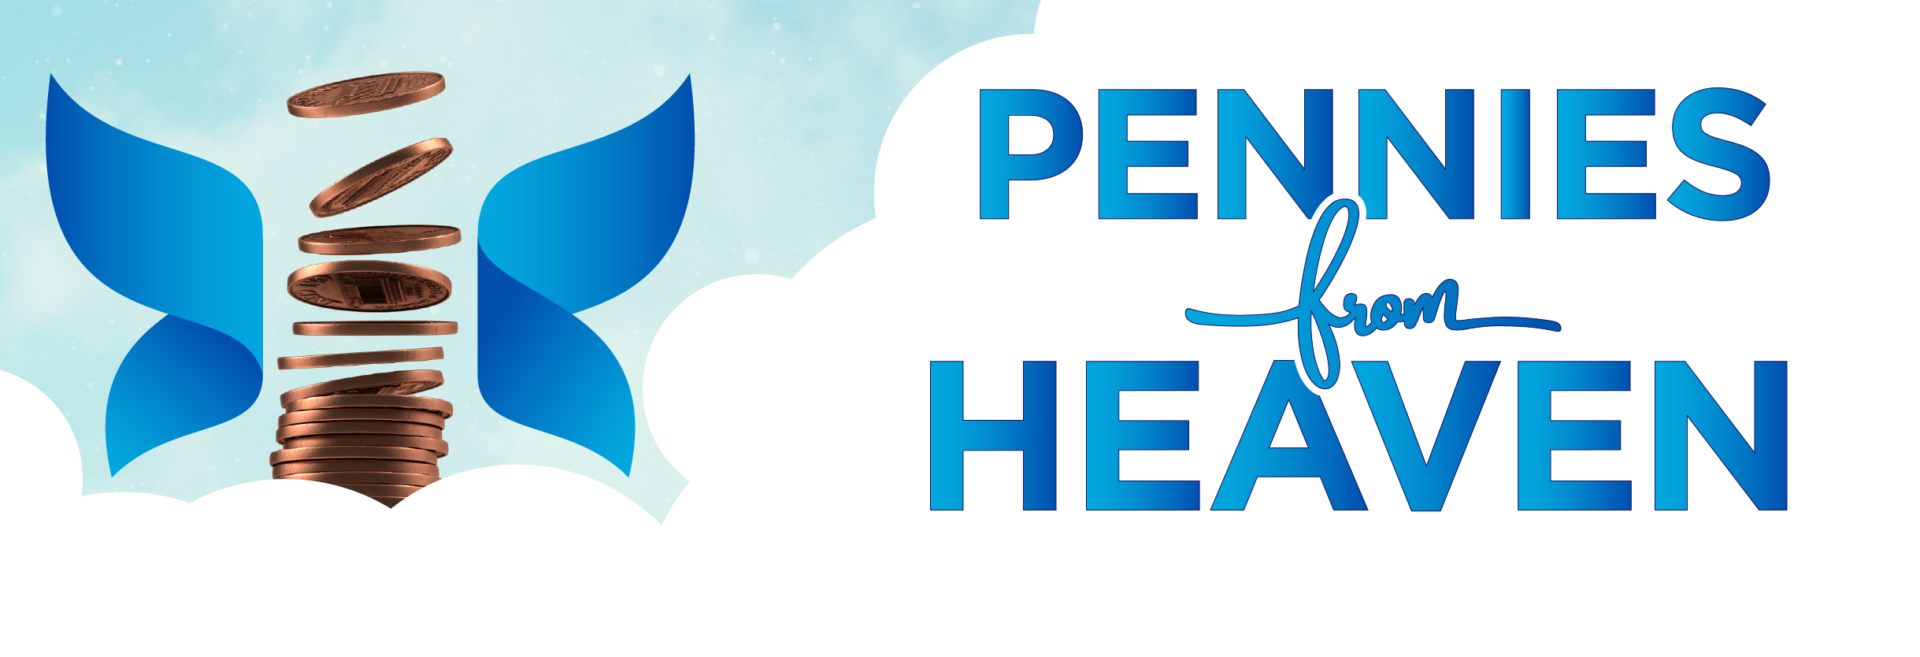 SECO News May 2020 Pennies From Heaven banner